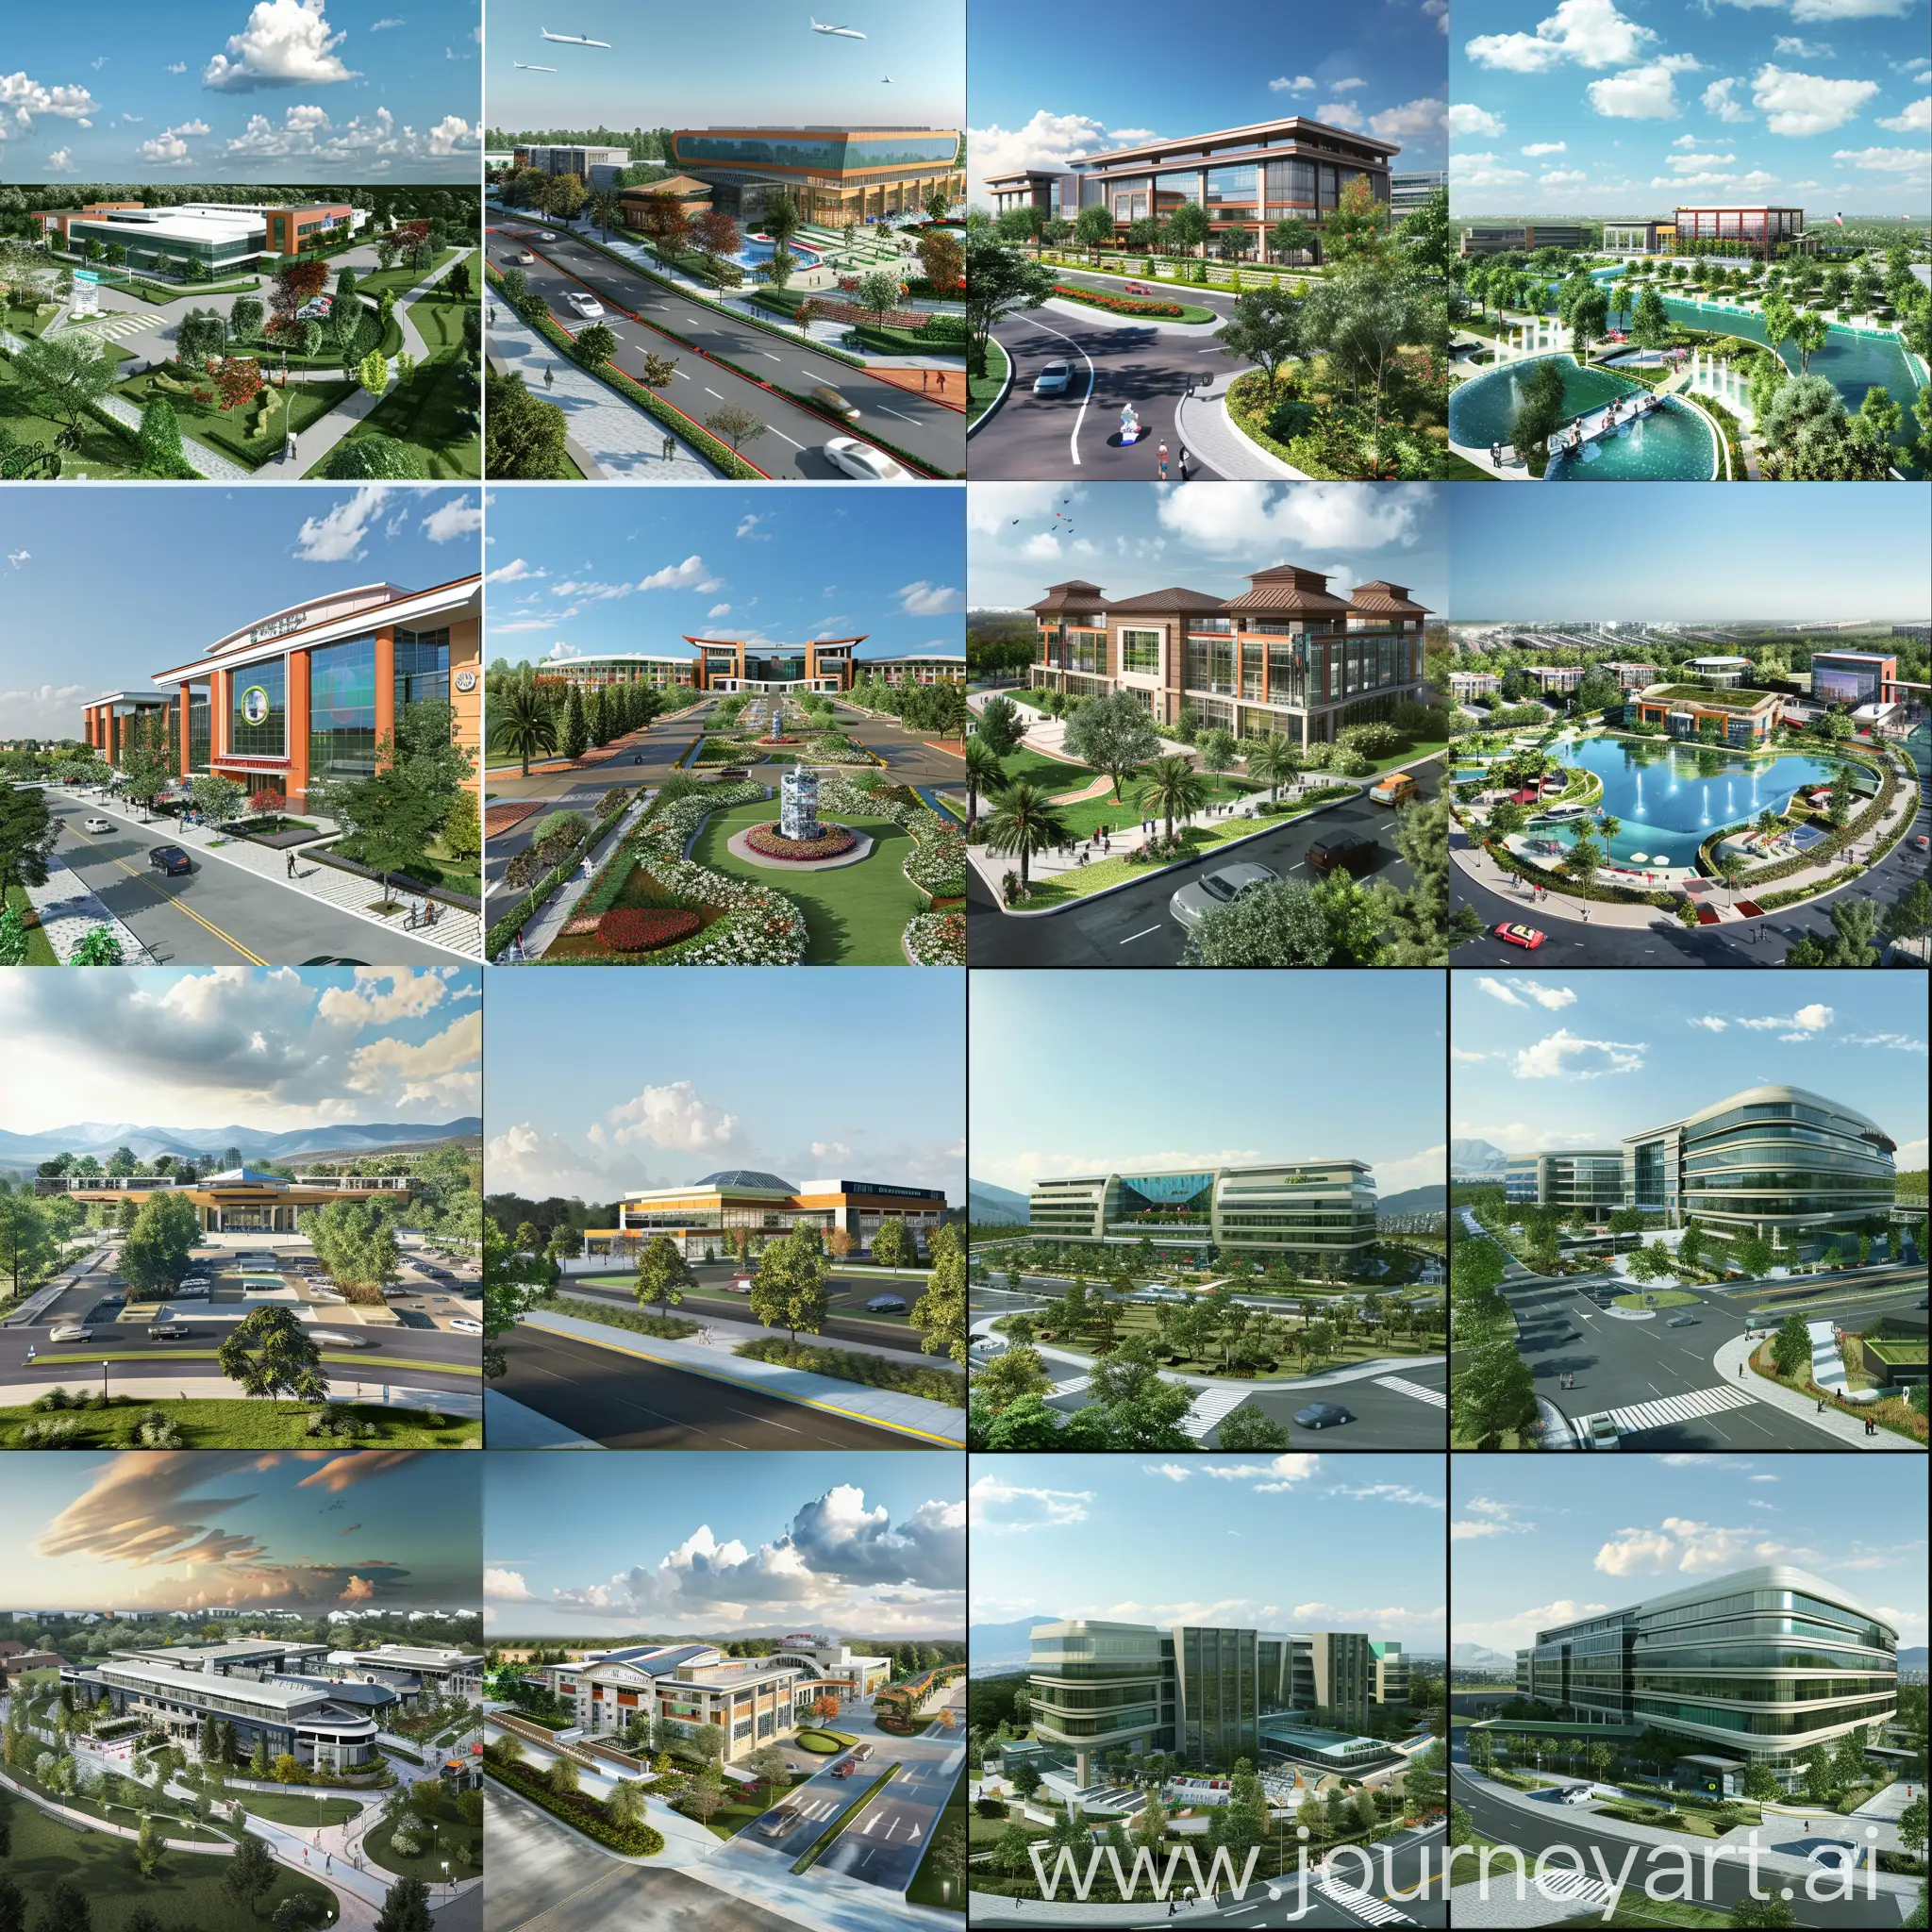 Give me four pictures of a business park project that includes an administrative building, offices, a clinic, an entertainment facility, and a hotel. Two images for the three-dimensional shots, one image for the layout, and the final image for an entire project section.